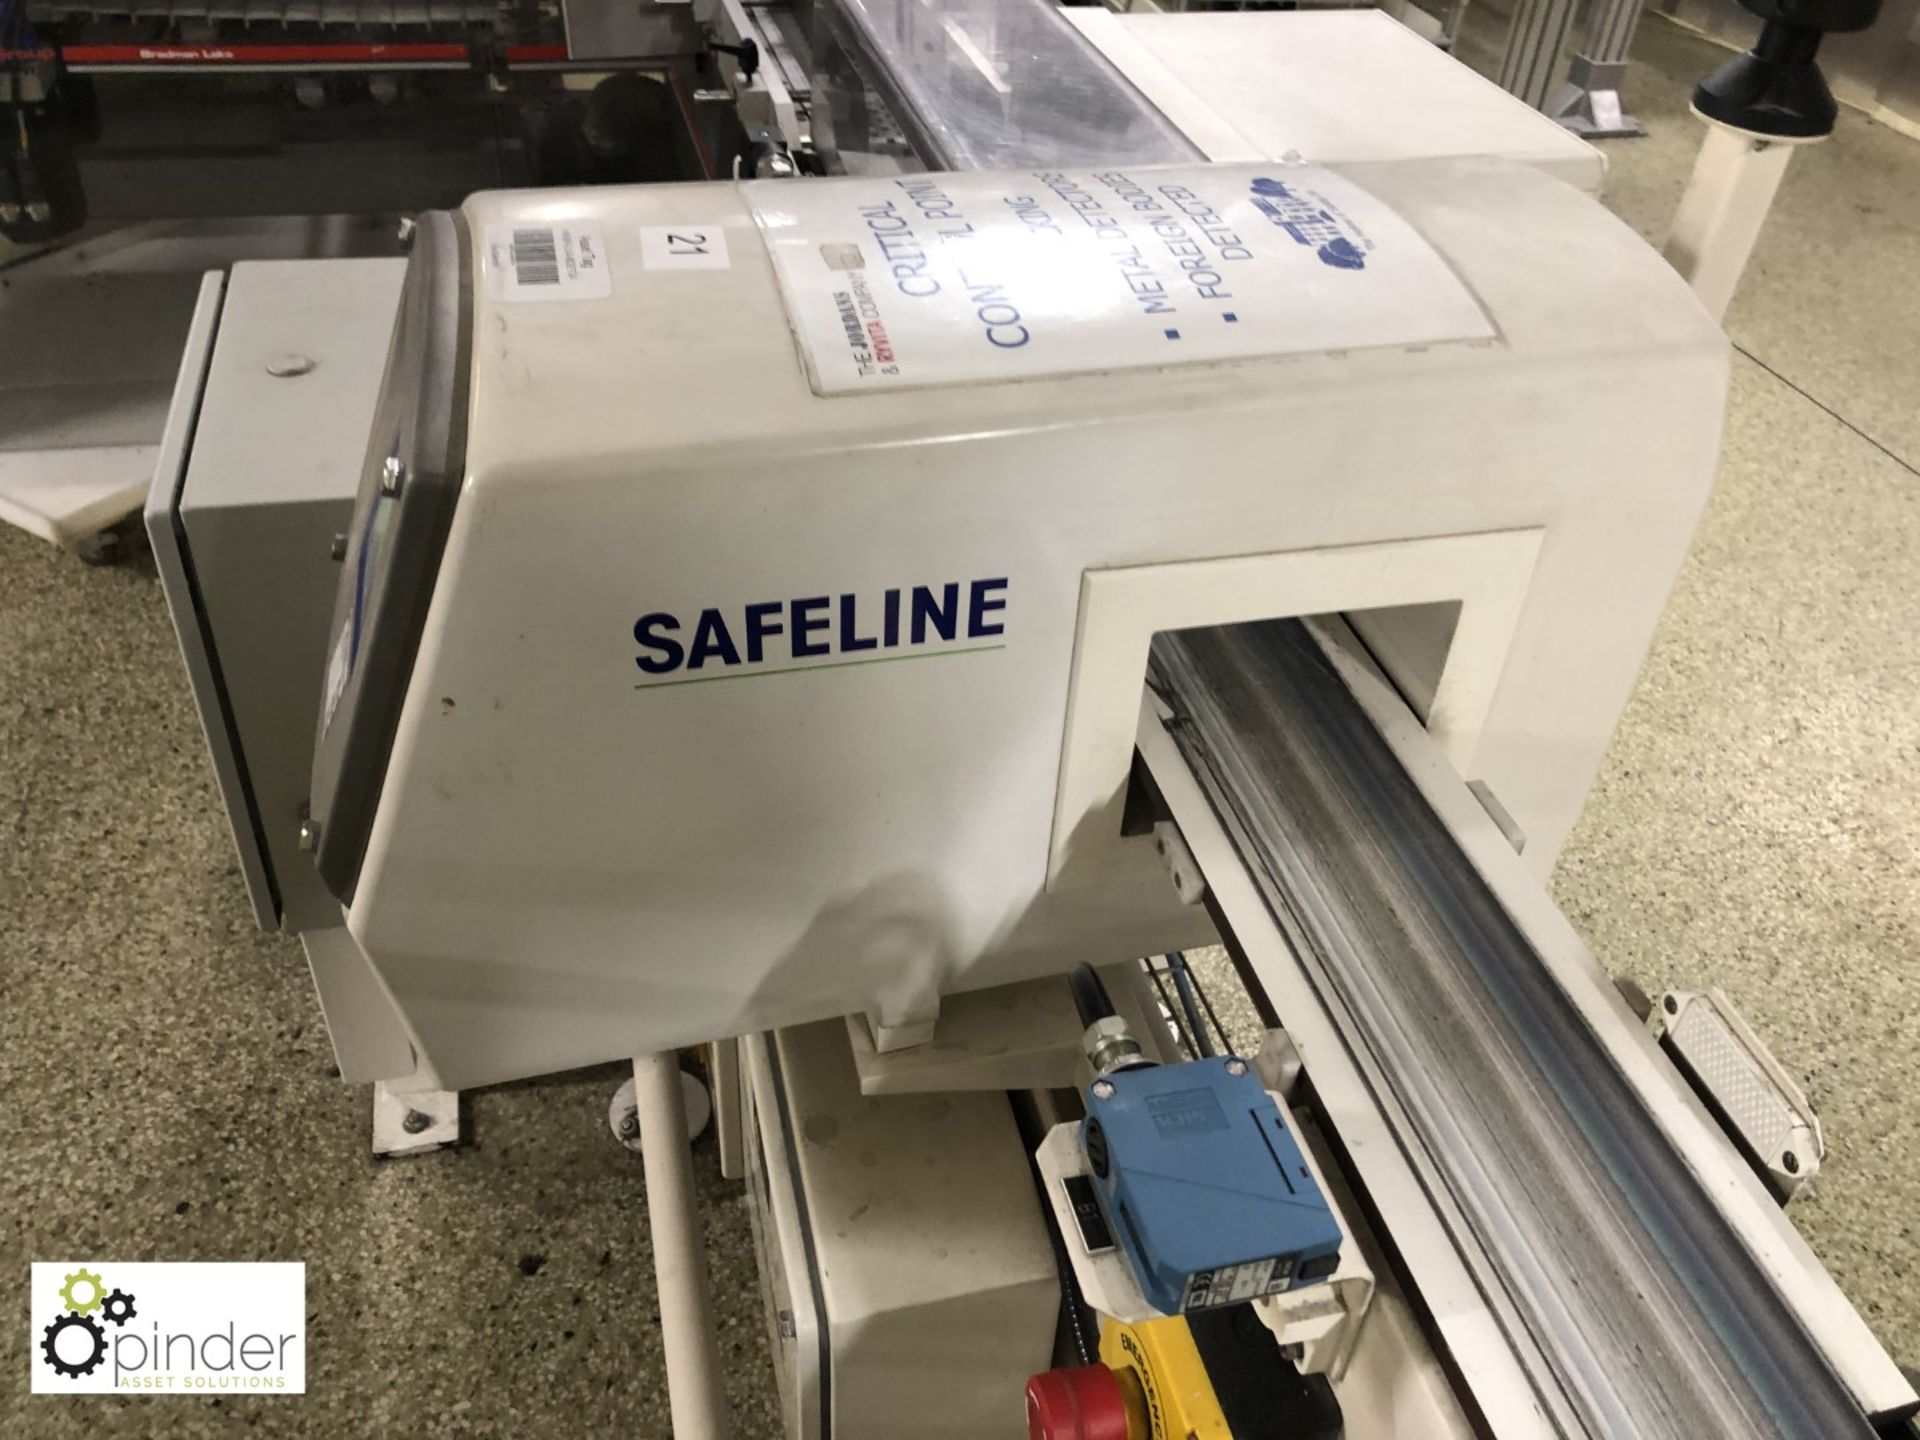 Safeline Metal Detector, 150mm x 70mm aperture, with air reject, serial number 81941, infeed 1680mm, - Image 8 of 8